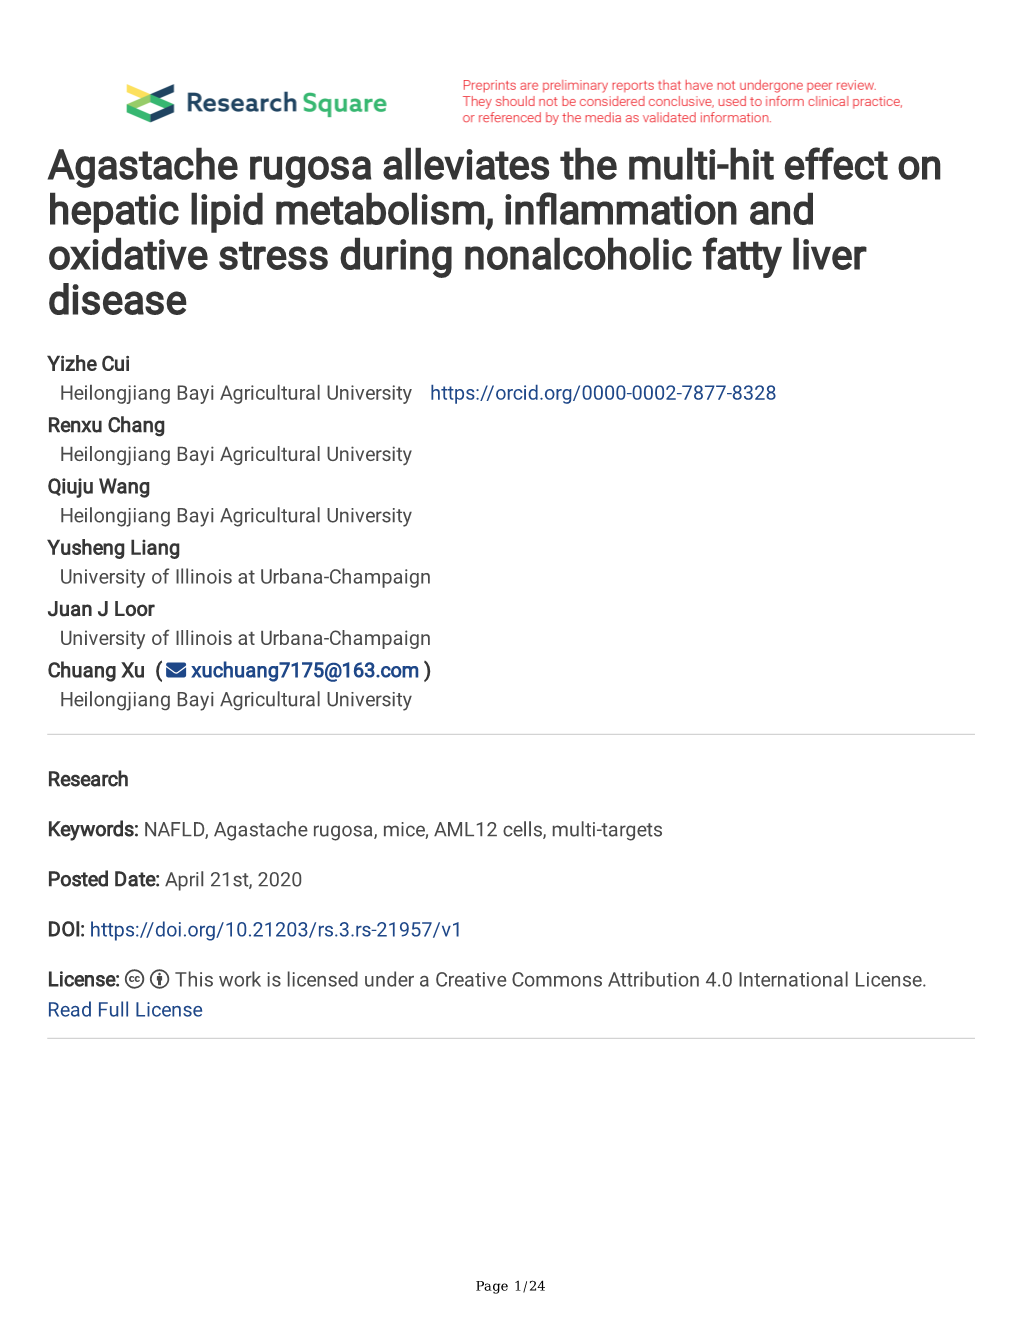 Agastache Rugosa Alleviates the Multi-Hit Effect on Hepatic Lipid Metabolism, Infammation and Oxidative Stress During Nonalcoholic Fatty Liver Disease